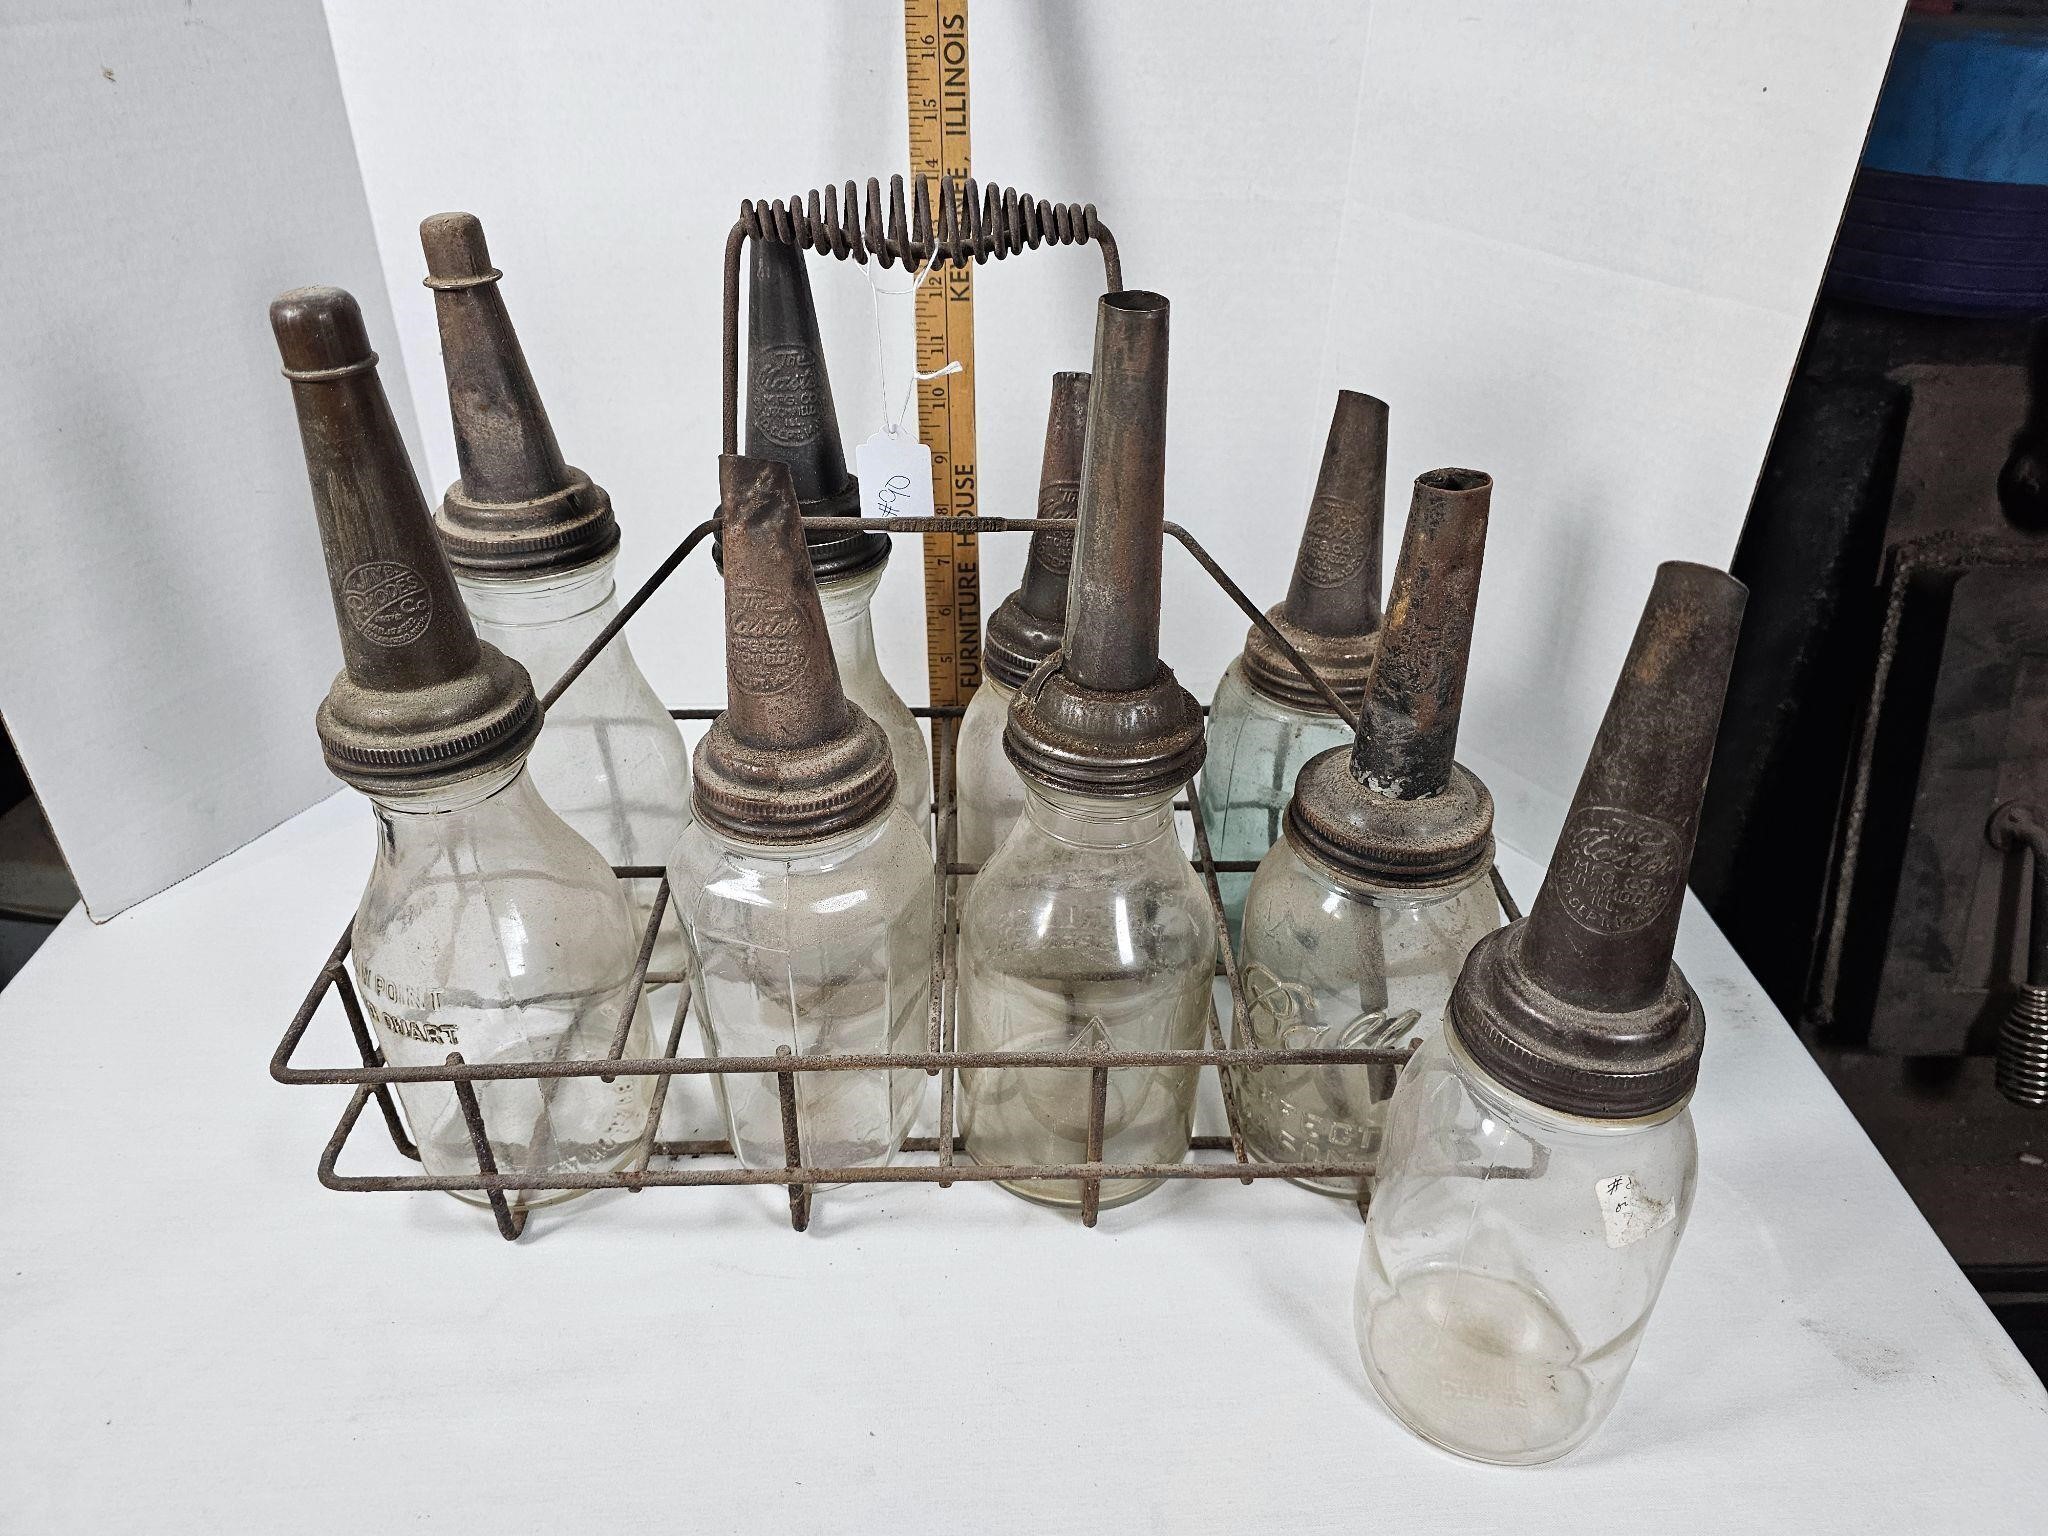 Vintage oil bottles with spouts in carrier